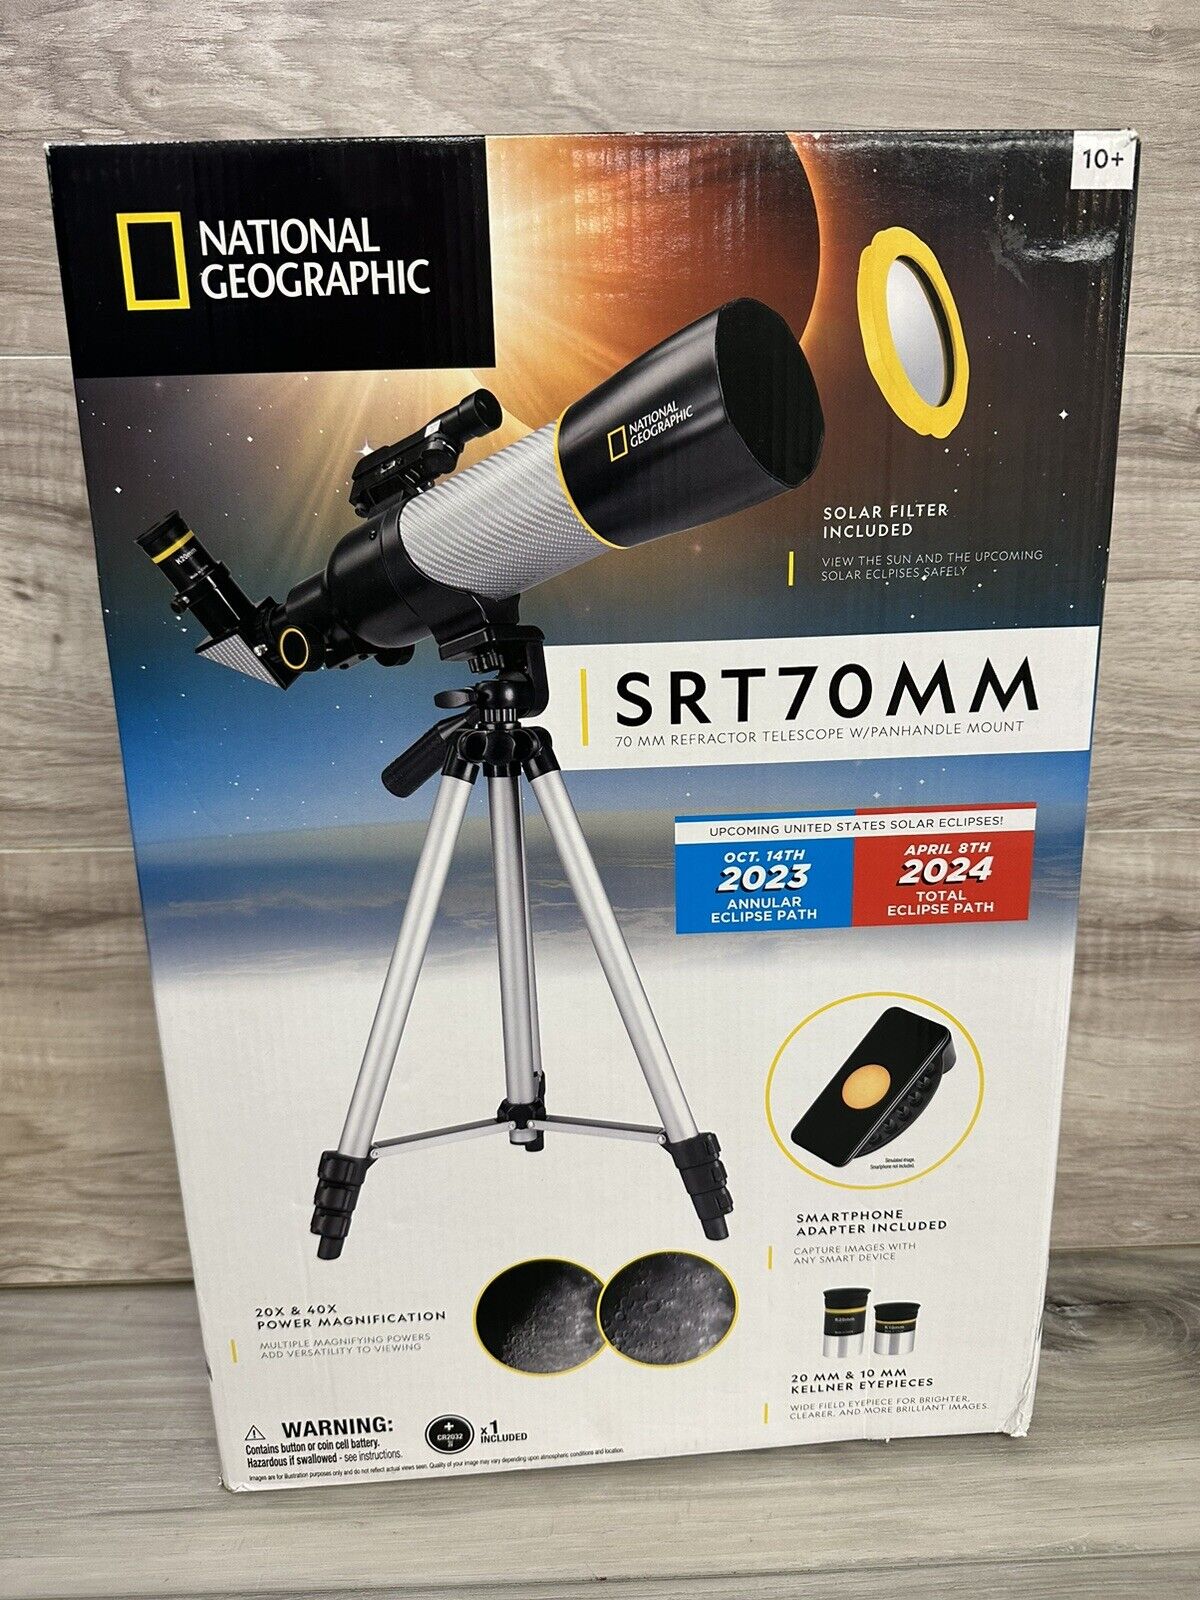 National Geographic 70MM Reflector Telescope W Panhandle Mount, Solar Filter